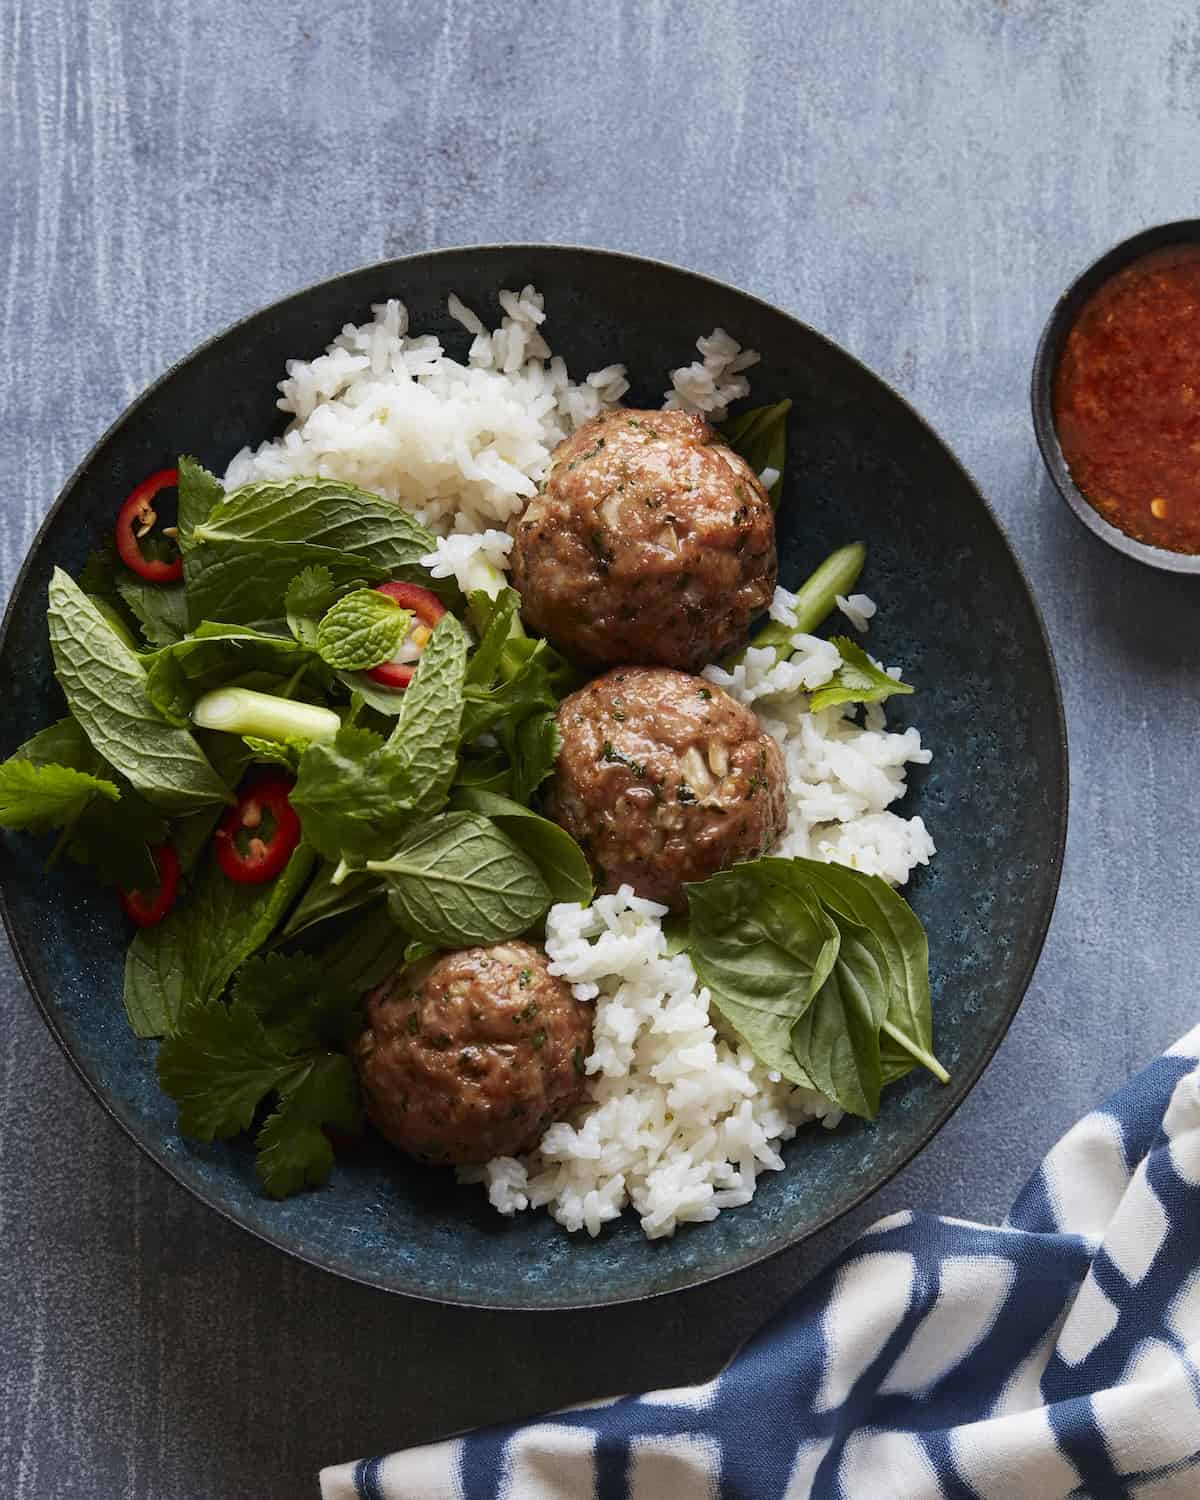 A blue ceramic plate with asian pork meatballs, rice, greens, sliced fresno chilis, a small bowl of sauce, containing soy sauce and sambal, and a kitchen towel on the side.